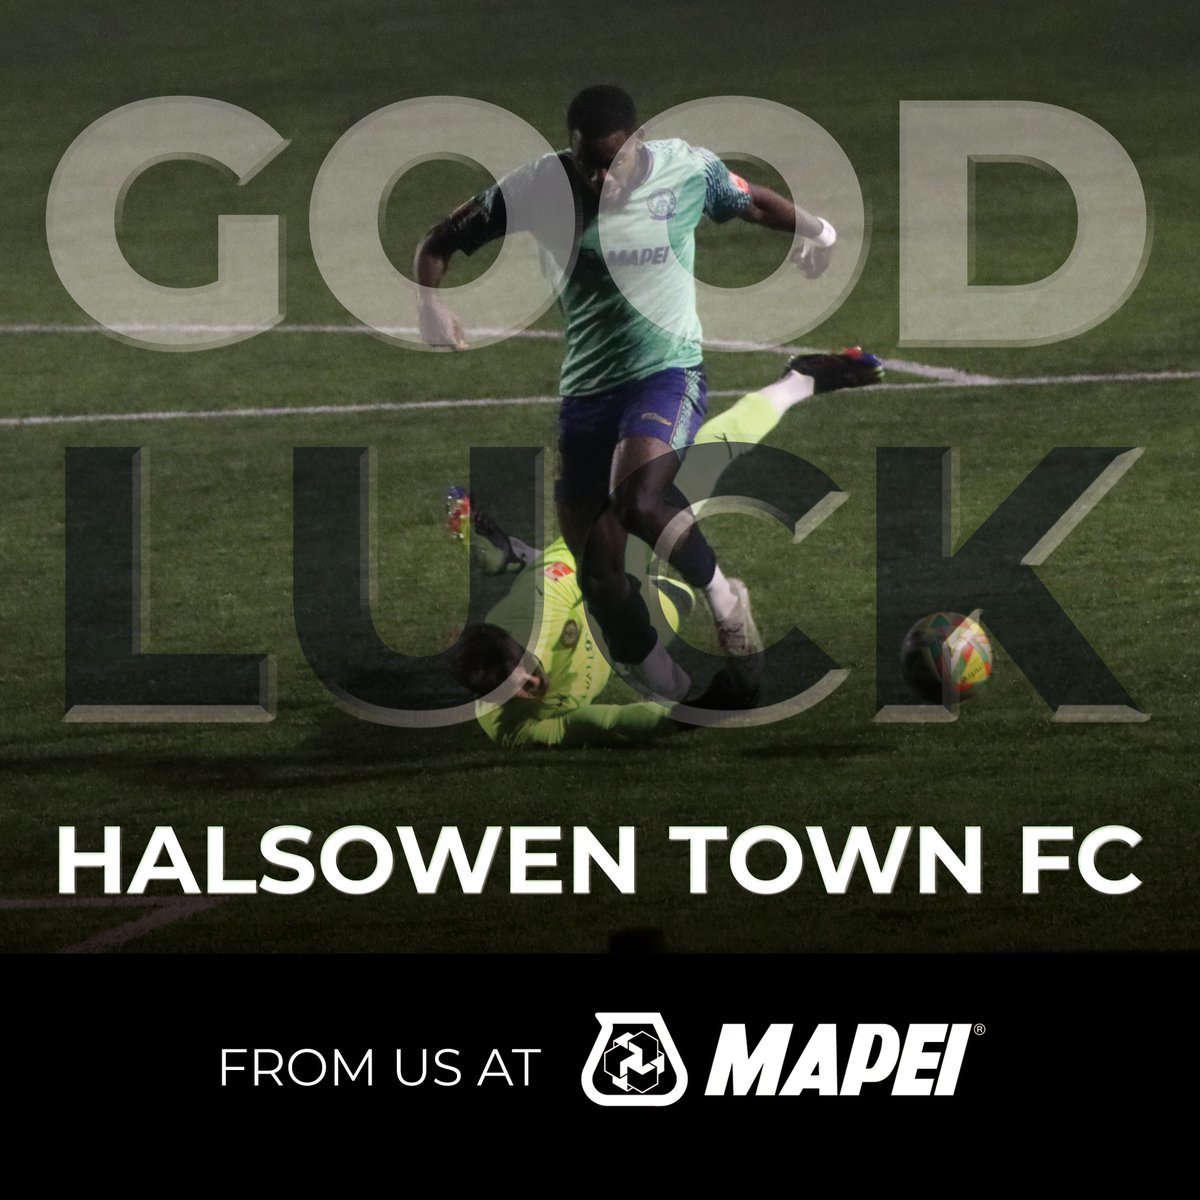 Good luck to @halesowentownfc who travel to #Berkhamsted this afternoon, for their last game of the season. 

#UpTheYeltz 💙  

#Mapei #ProudSponsors #Halesowen

#football #NonLeagueFootball